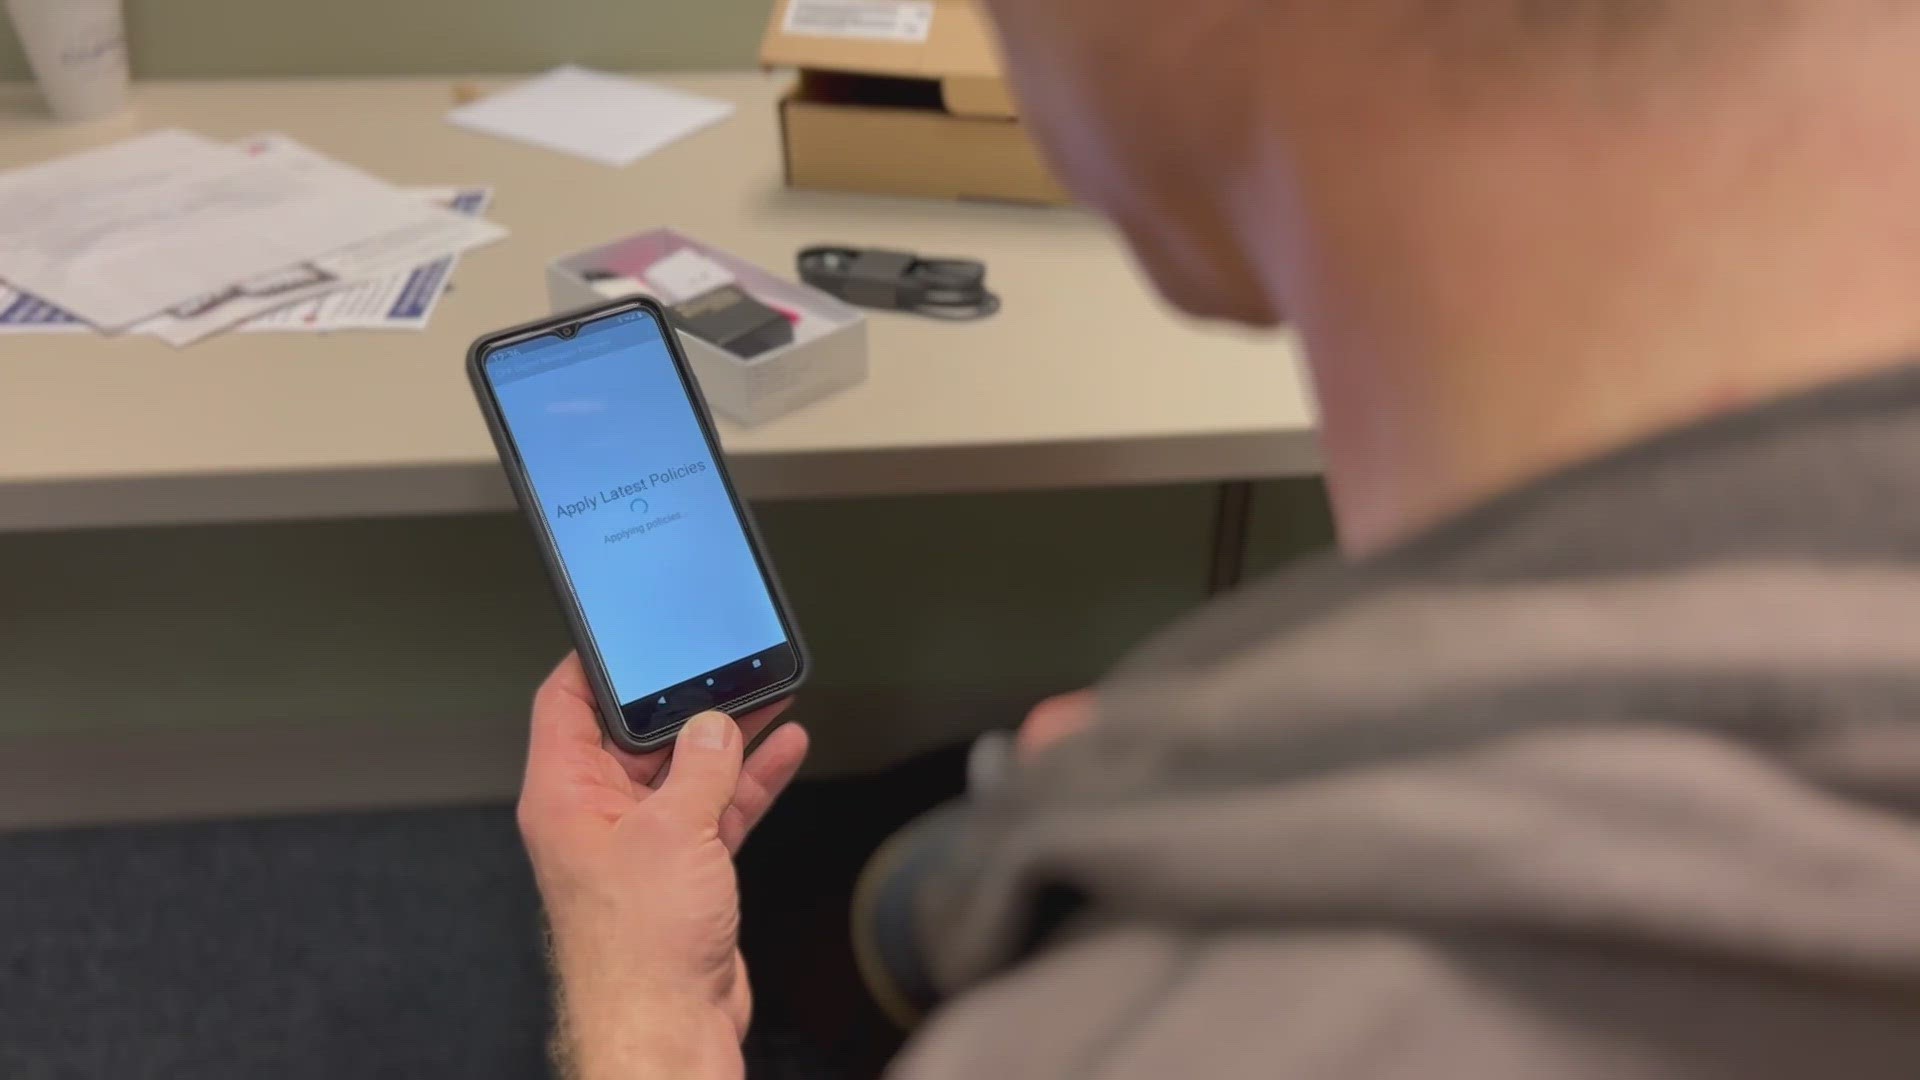 The Washington State Department of Veteran's Affairs Digital Navigator program is offering devices like laptops, smartphones and hotspots to veterans.